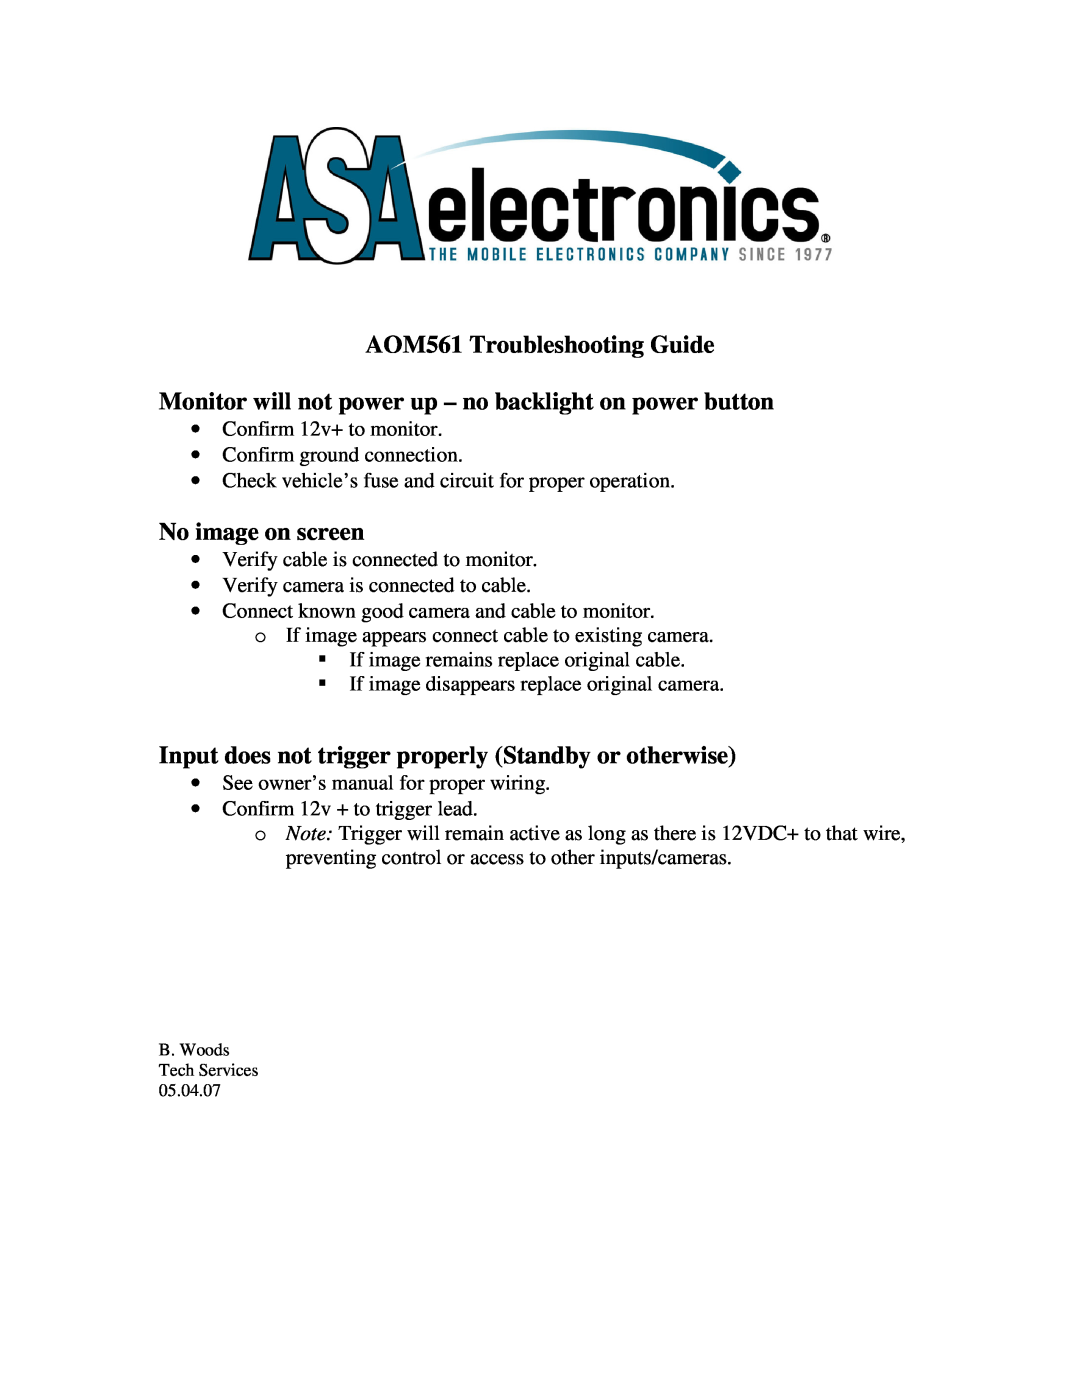 ASA Electronics owner manual AOM561 Troubleshooting Guide, Monitor will not power up - no backlight on power button 